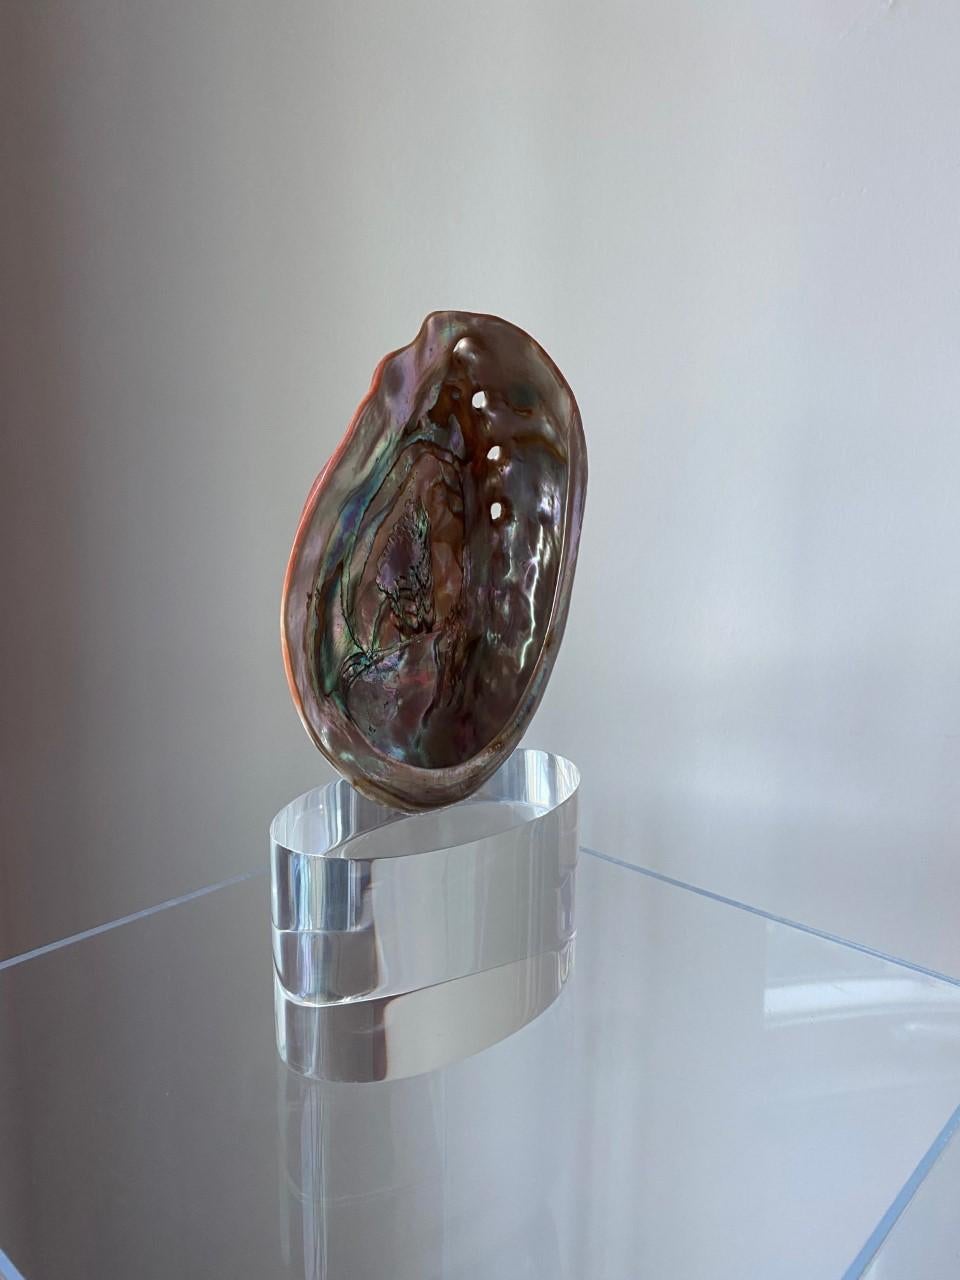 Hollywood Regency Organic Modernist Sculptural Clam Shell on Lucite Base Sculpture For Sale